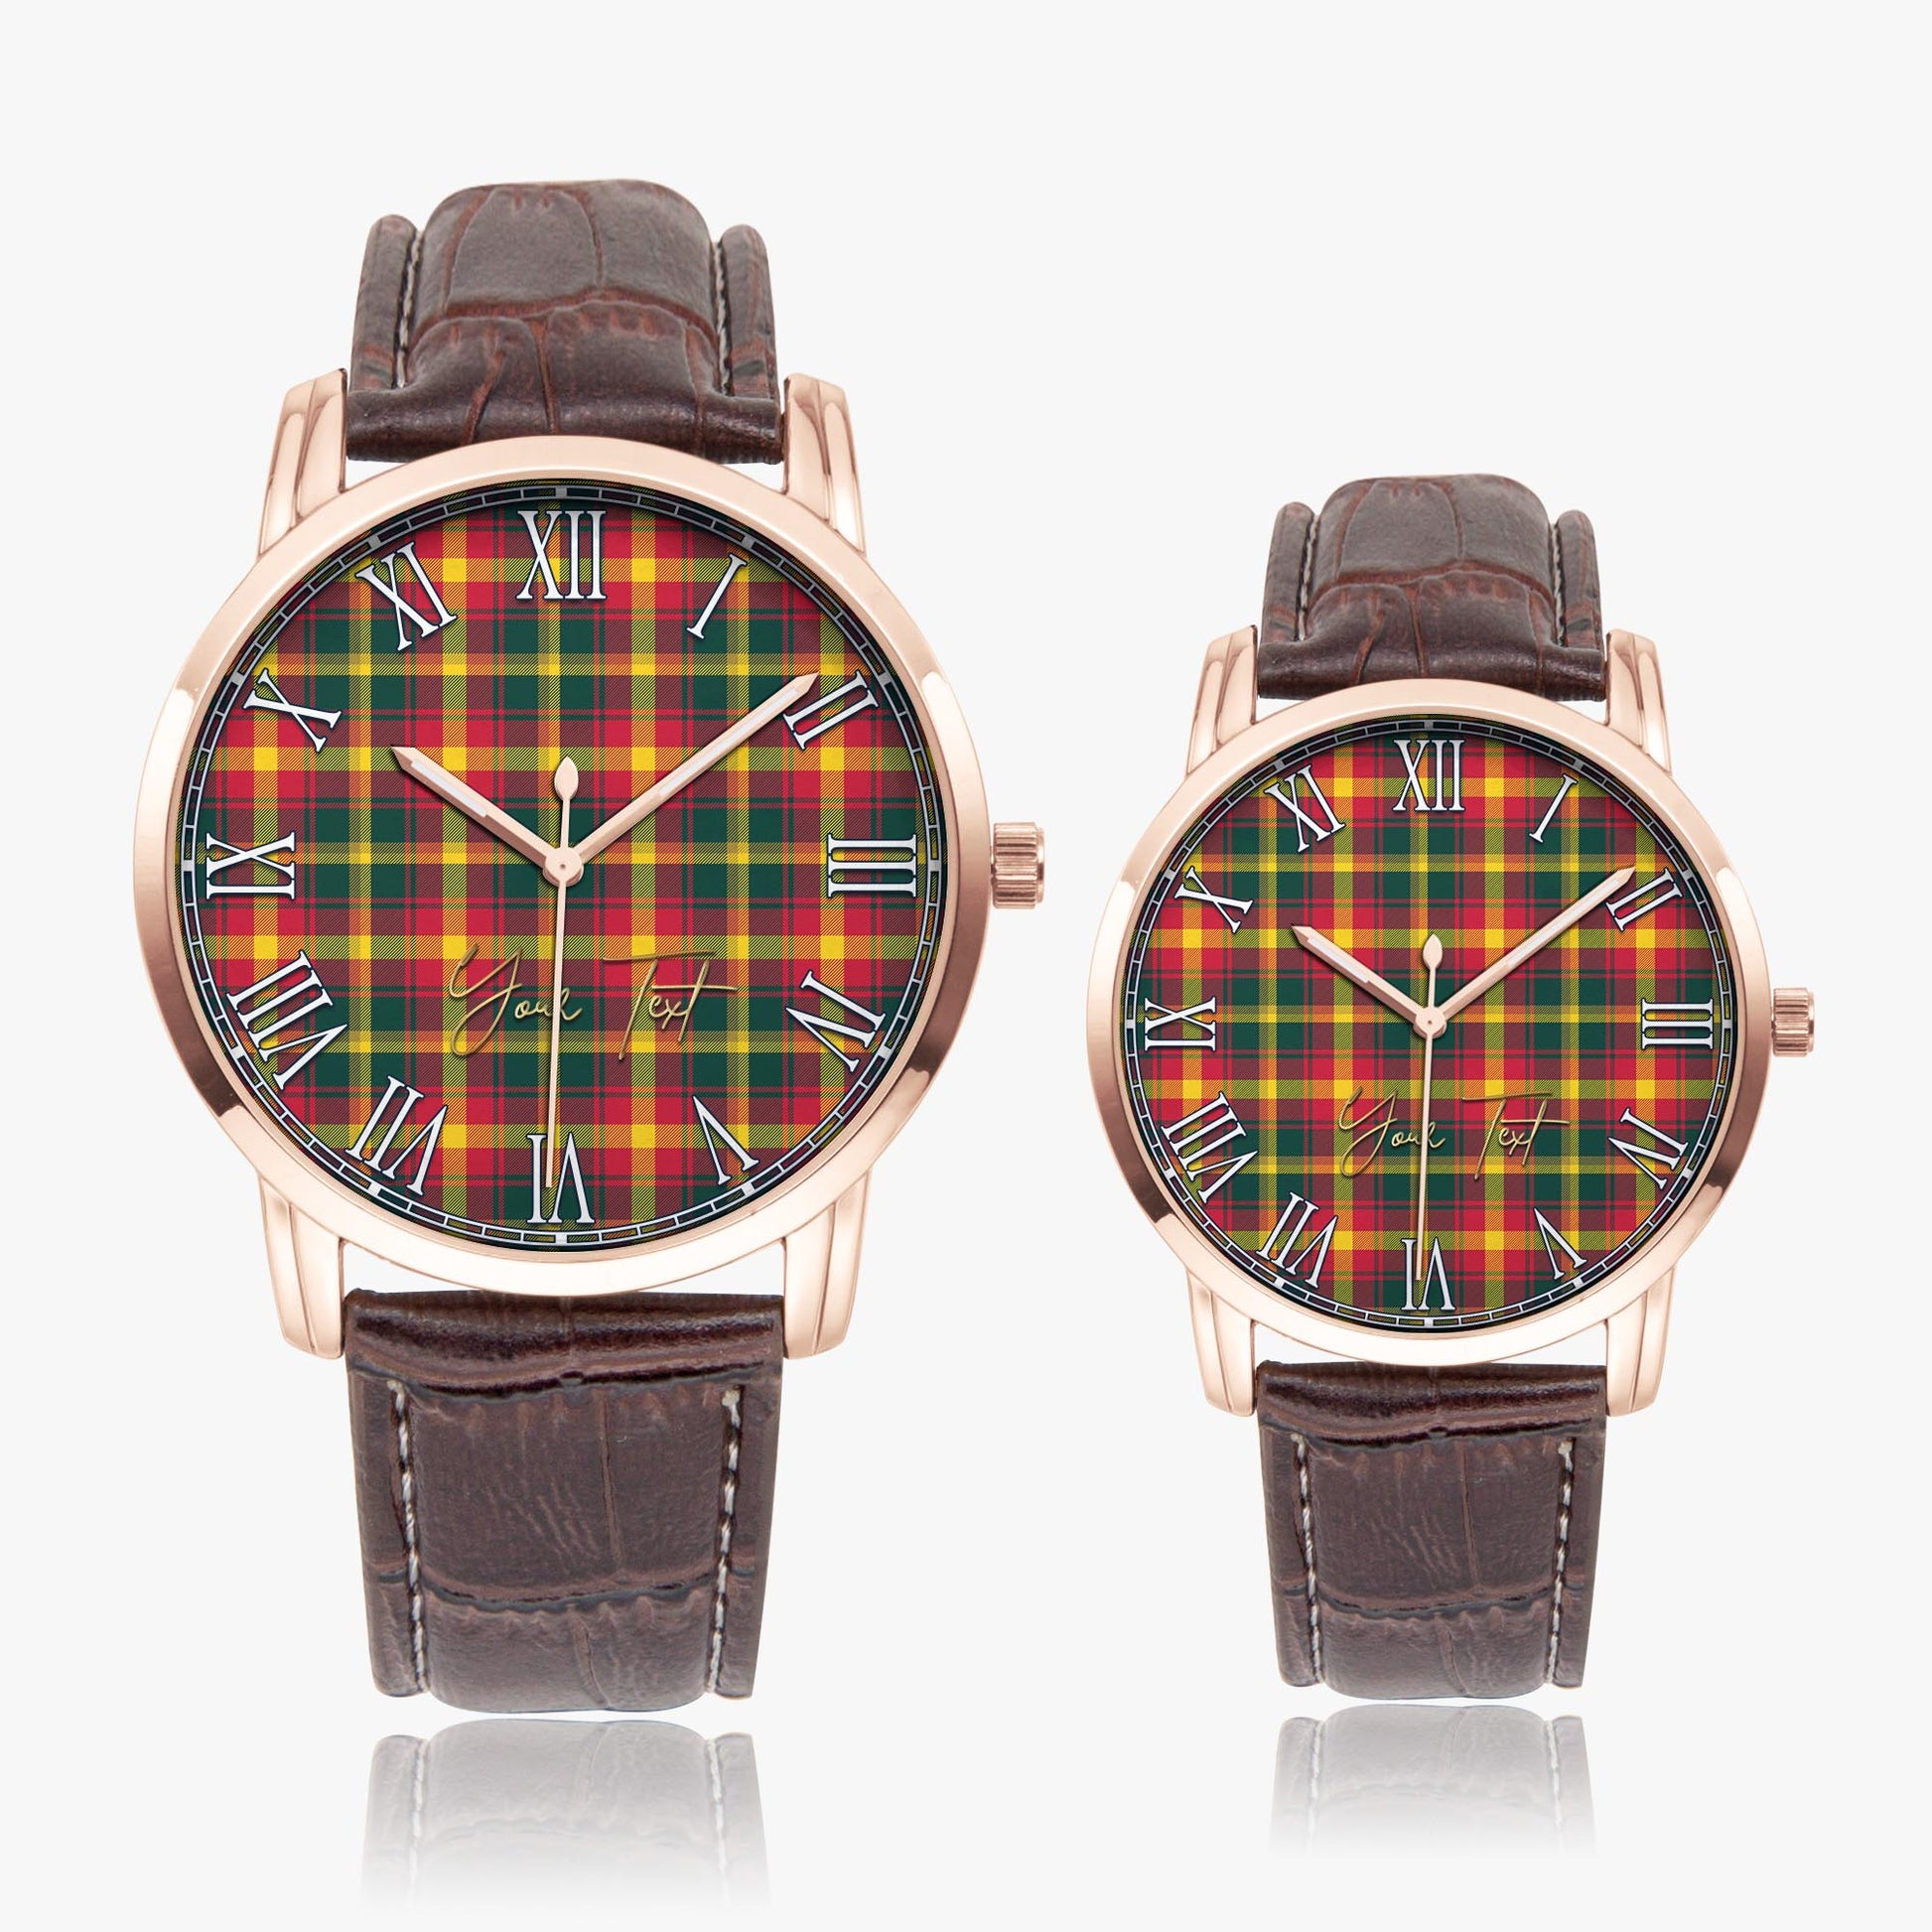 Maple Leaf Canada Tartan Personalized Your Text Leather Trap Quartz Watch Wide Type Rose Gold Case With Brown Leather Strap - Tartanvibesclothing